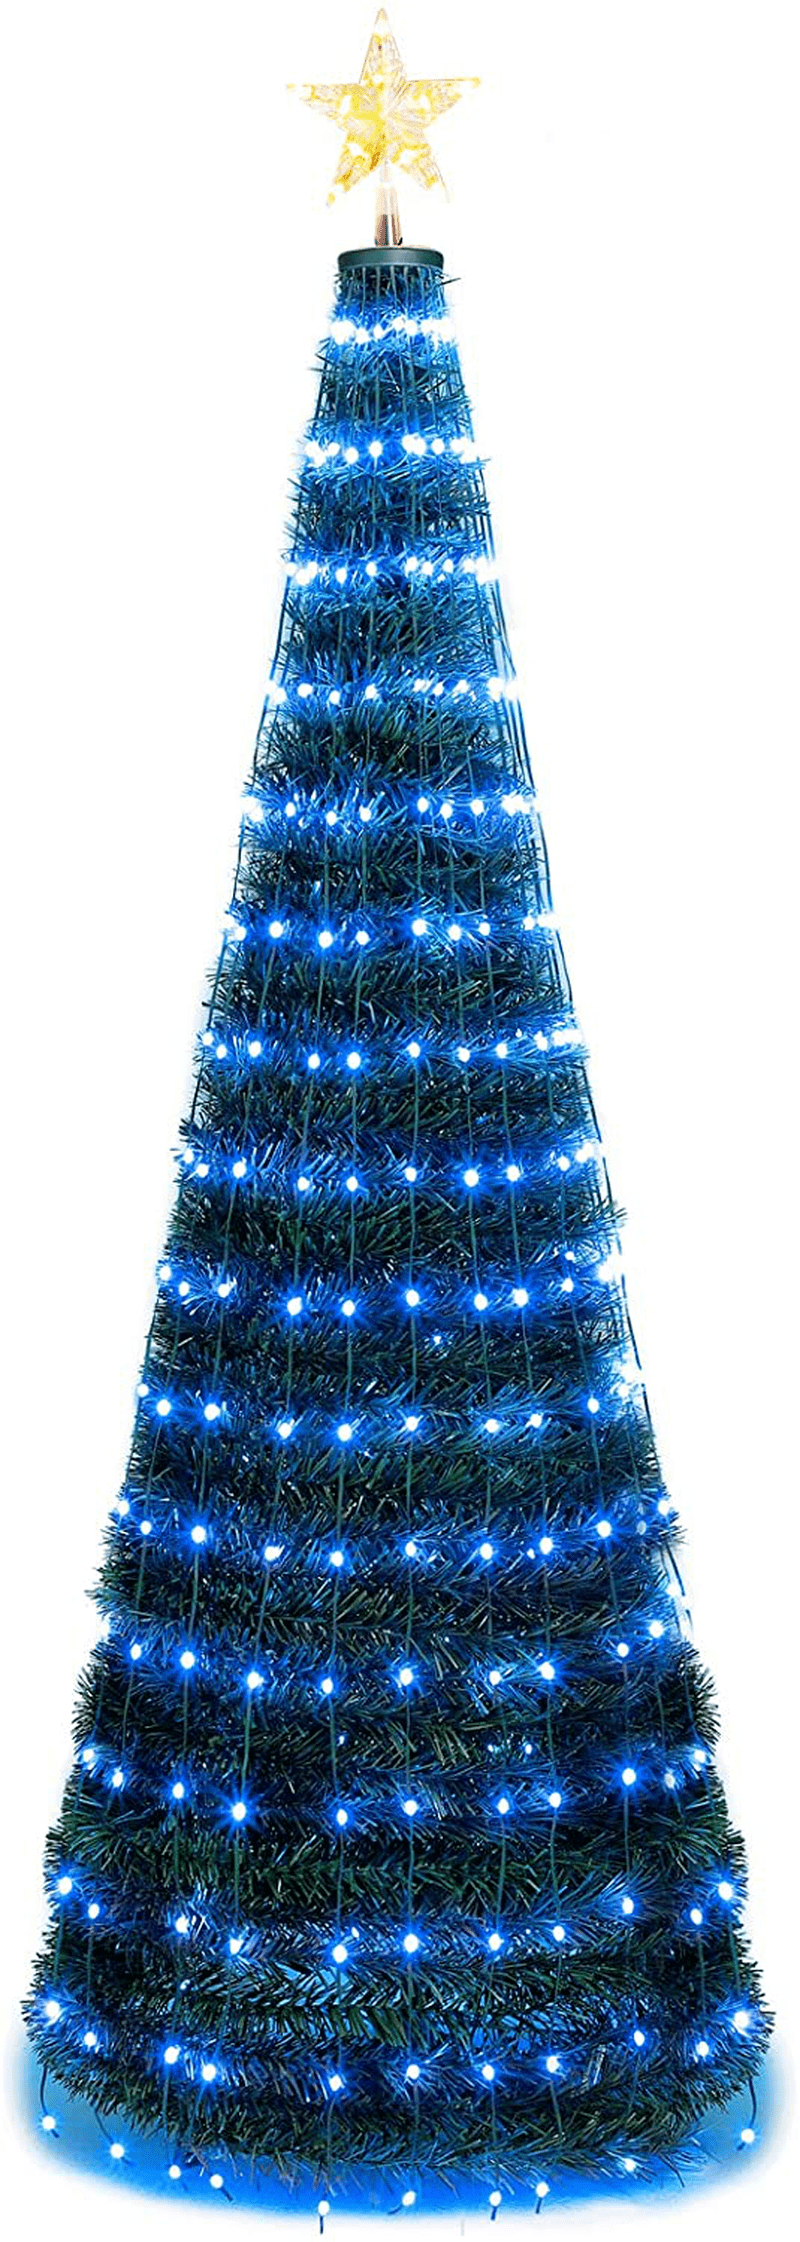 Artificial Christmas Tree | 6FT Pre-Lit Christmas Tree 18 Flash Modes with 314 Multicolored LED Lights| Quick Install Foldable Stand | Perfect for Indoor and Outdoor Holiday Decoration